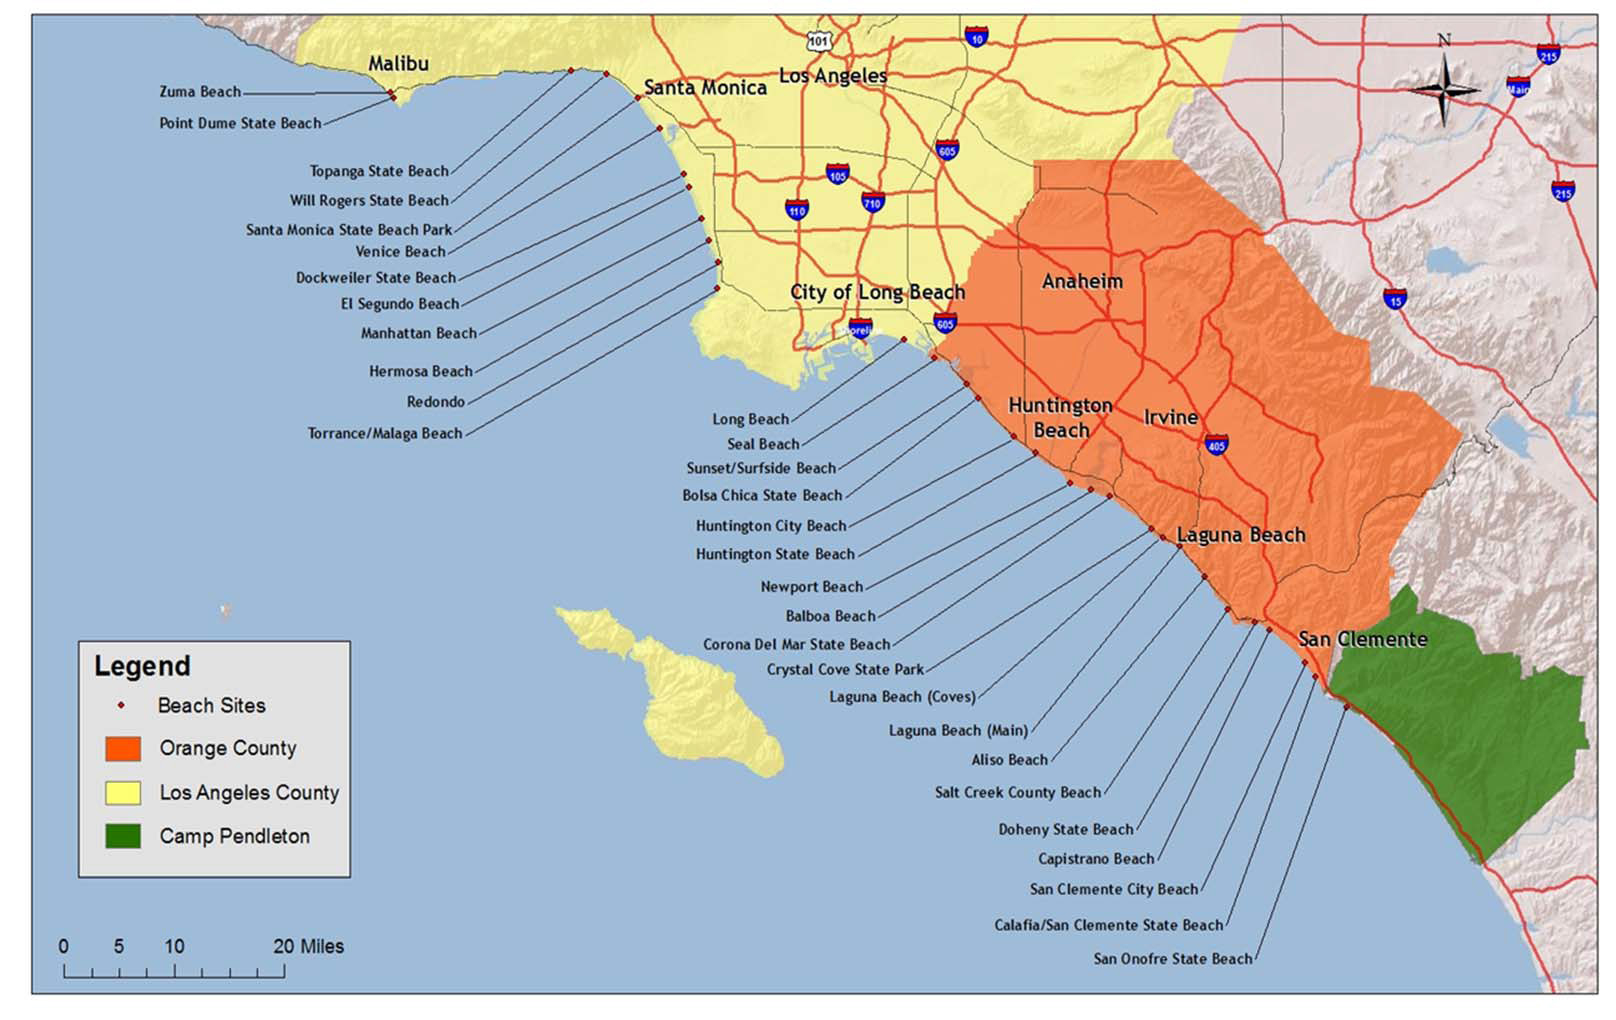 Where Is Del Mar California On The Map - Klipy - Where Is Del Mar California On The Map